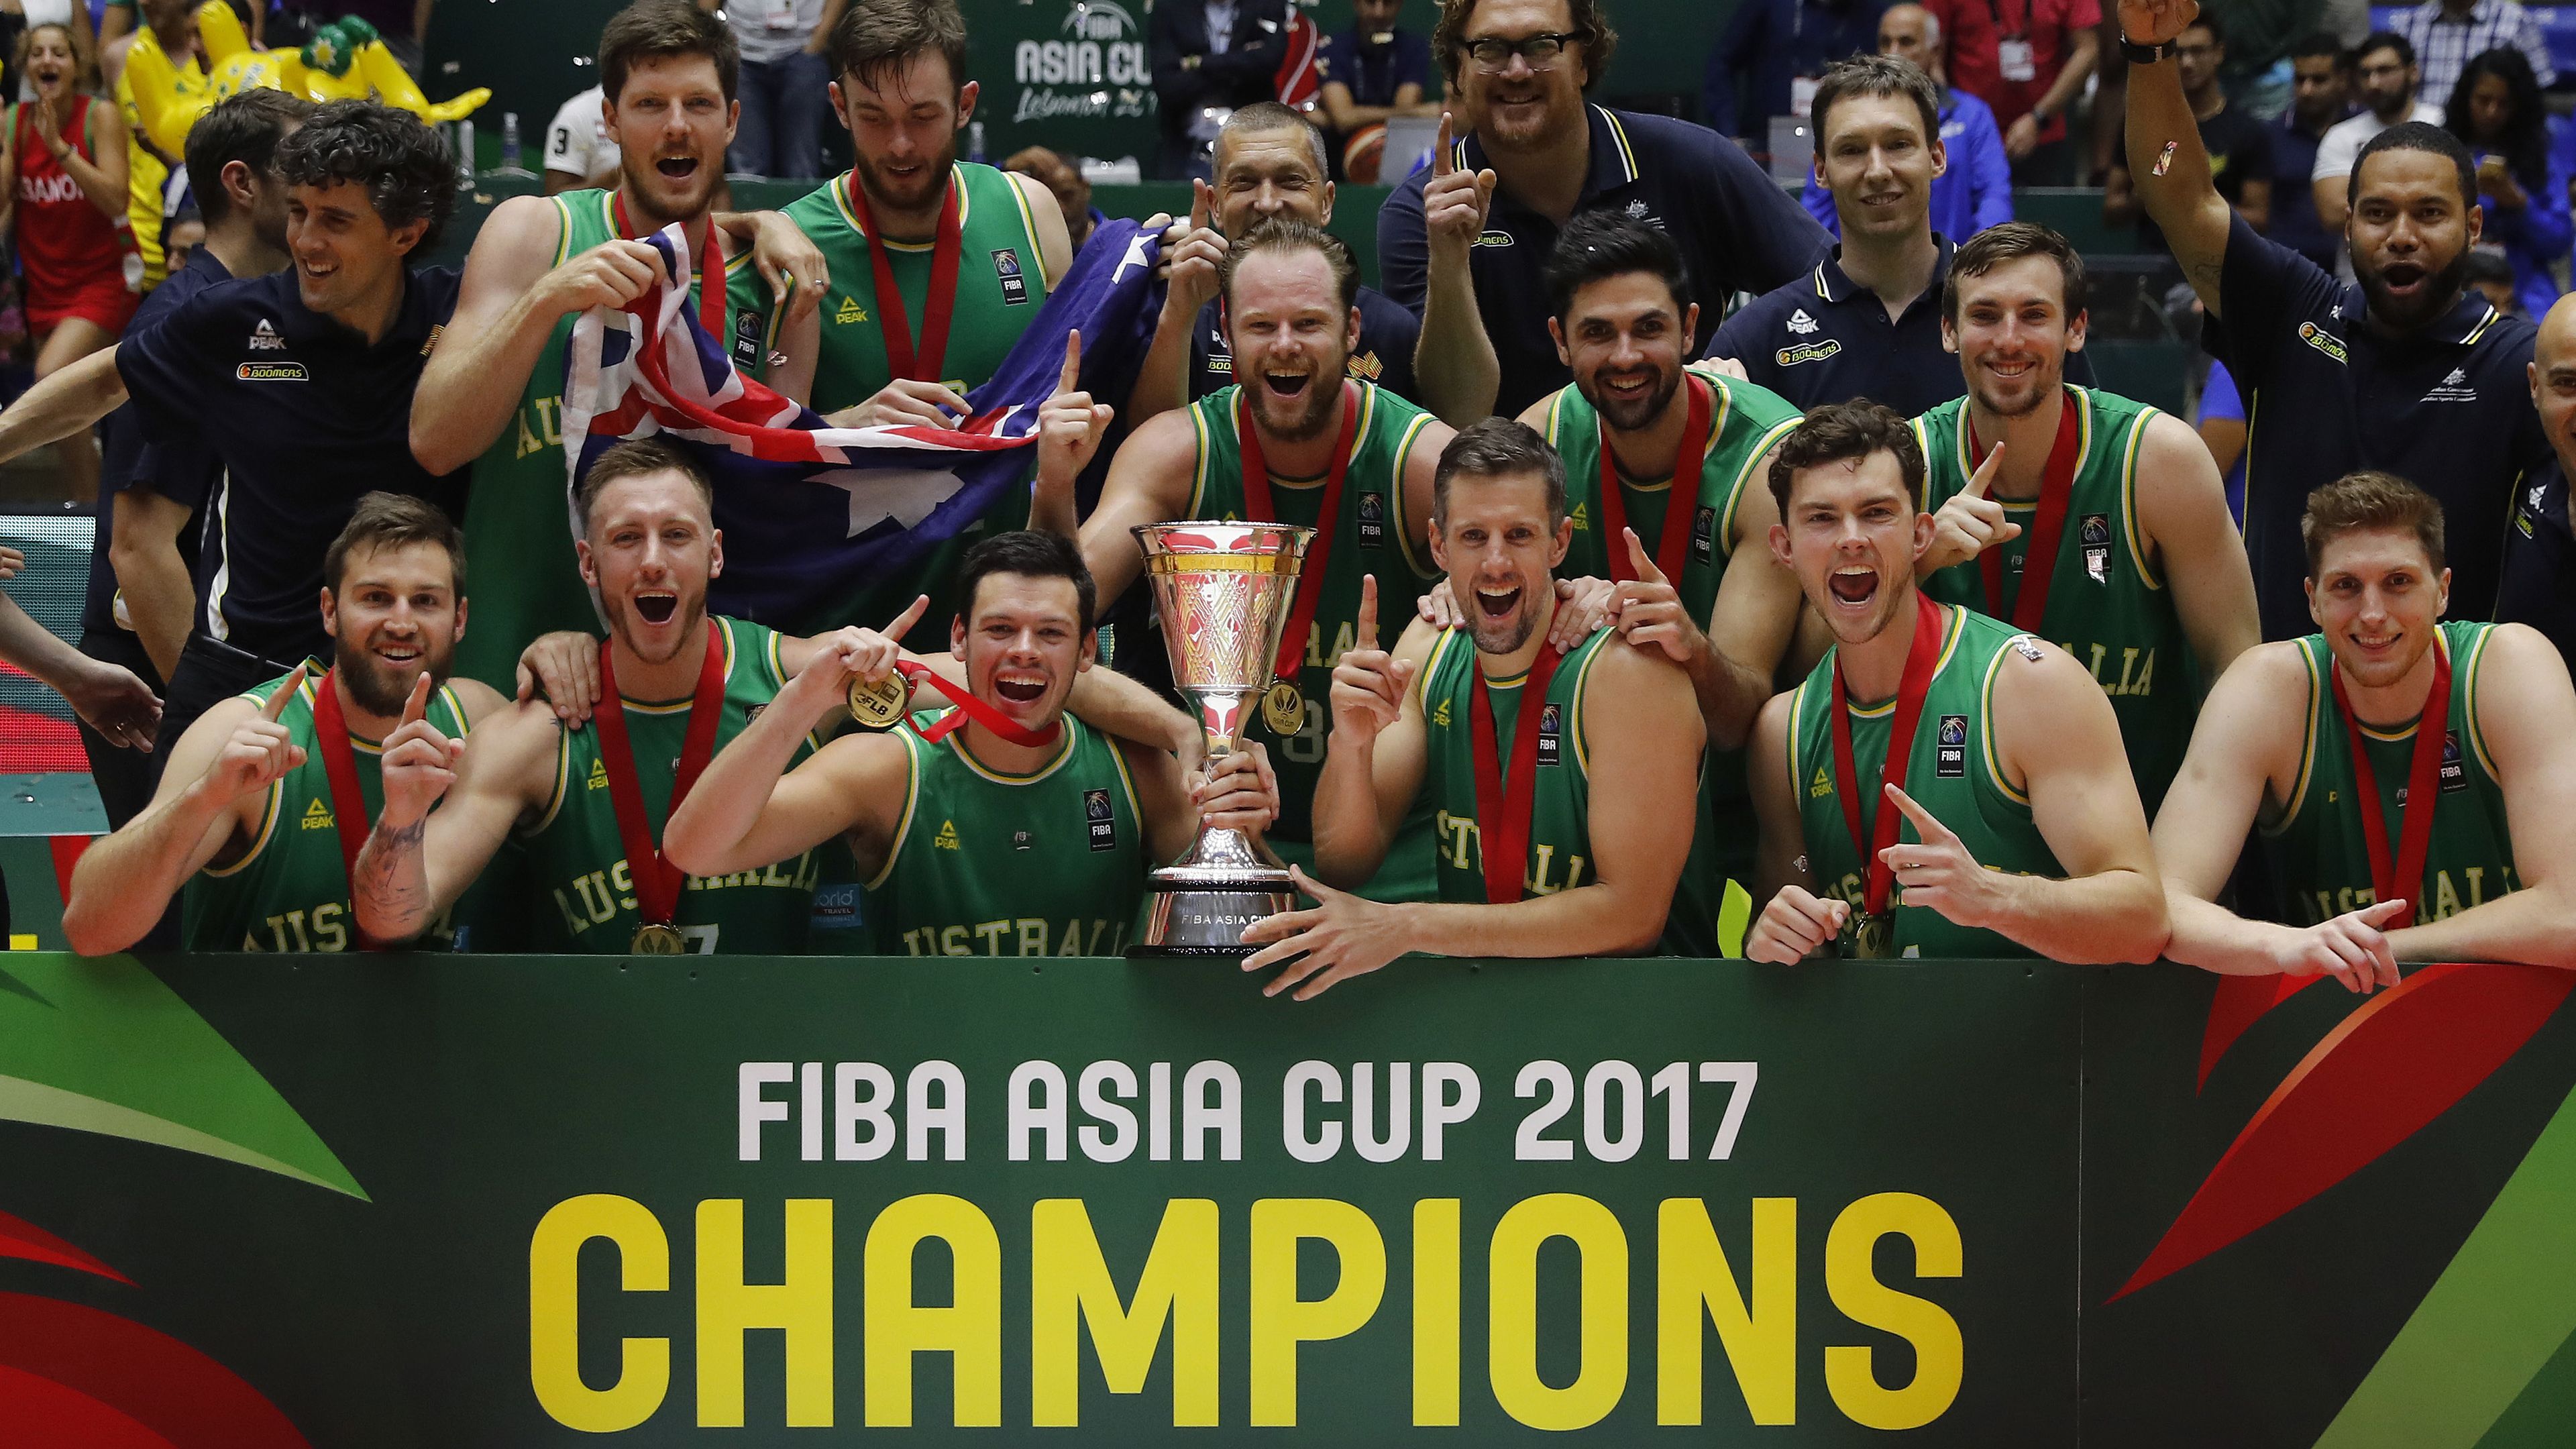 Boomers win FIBA Asia Cup but controversially miss out on All Star selection